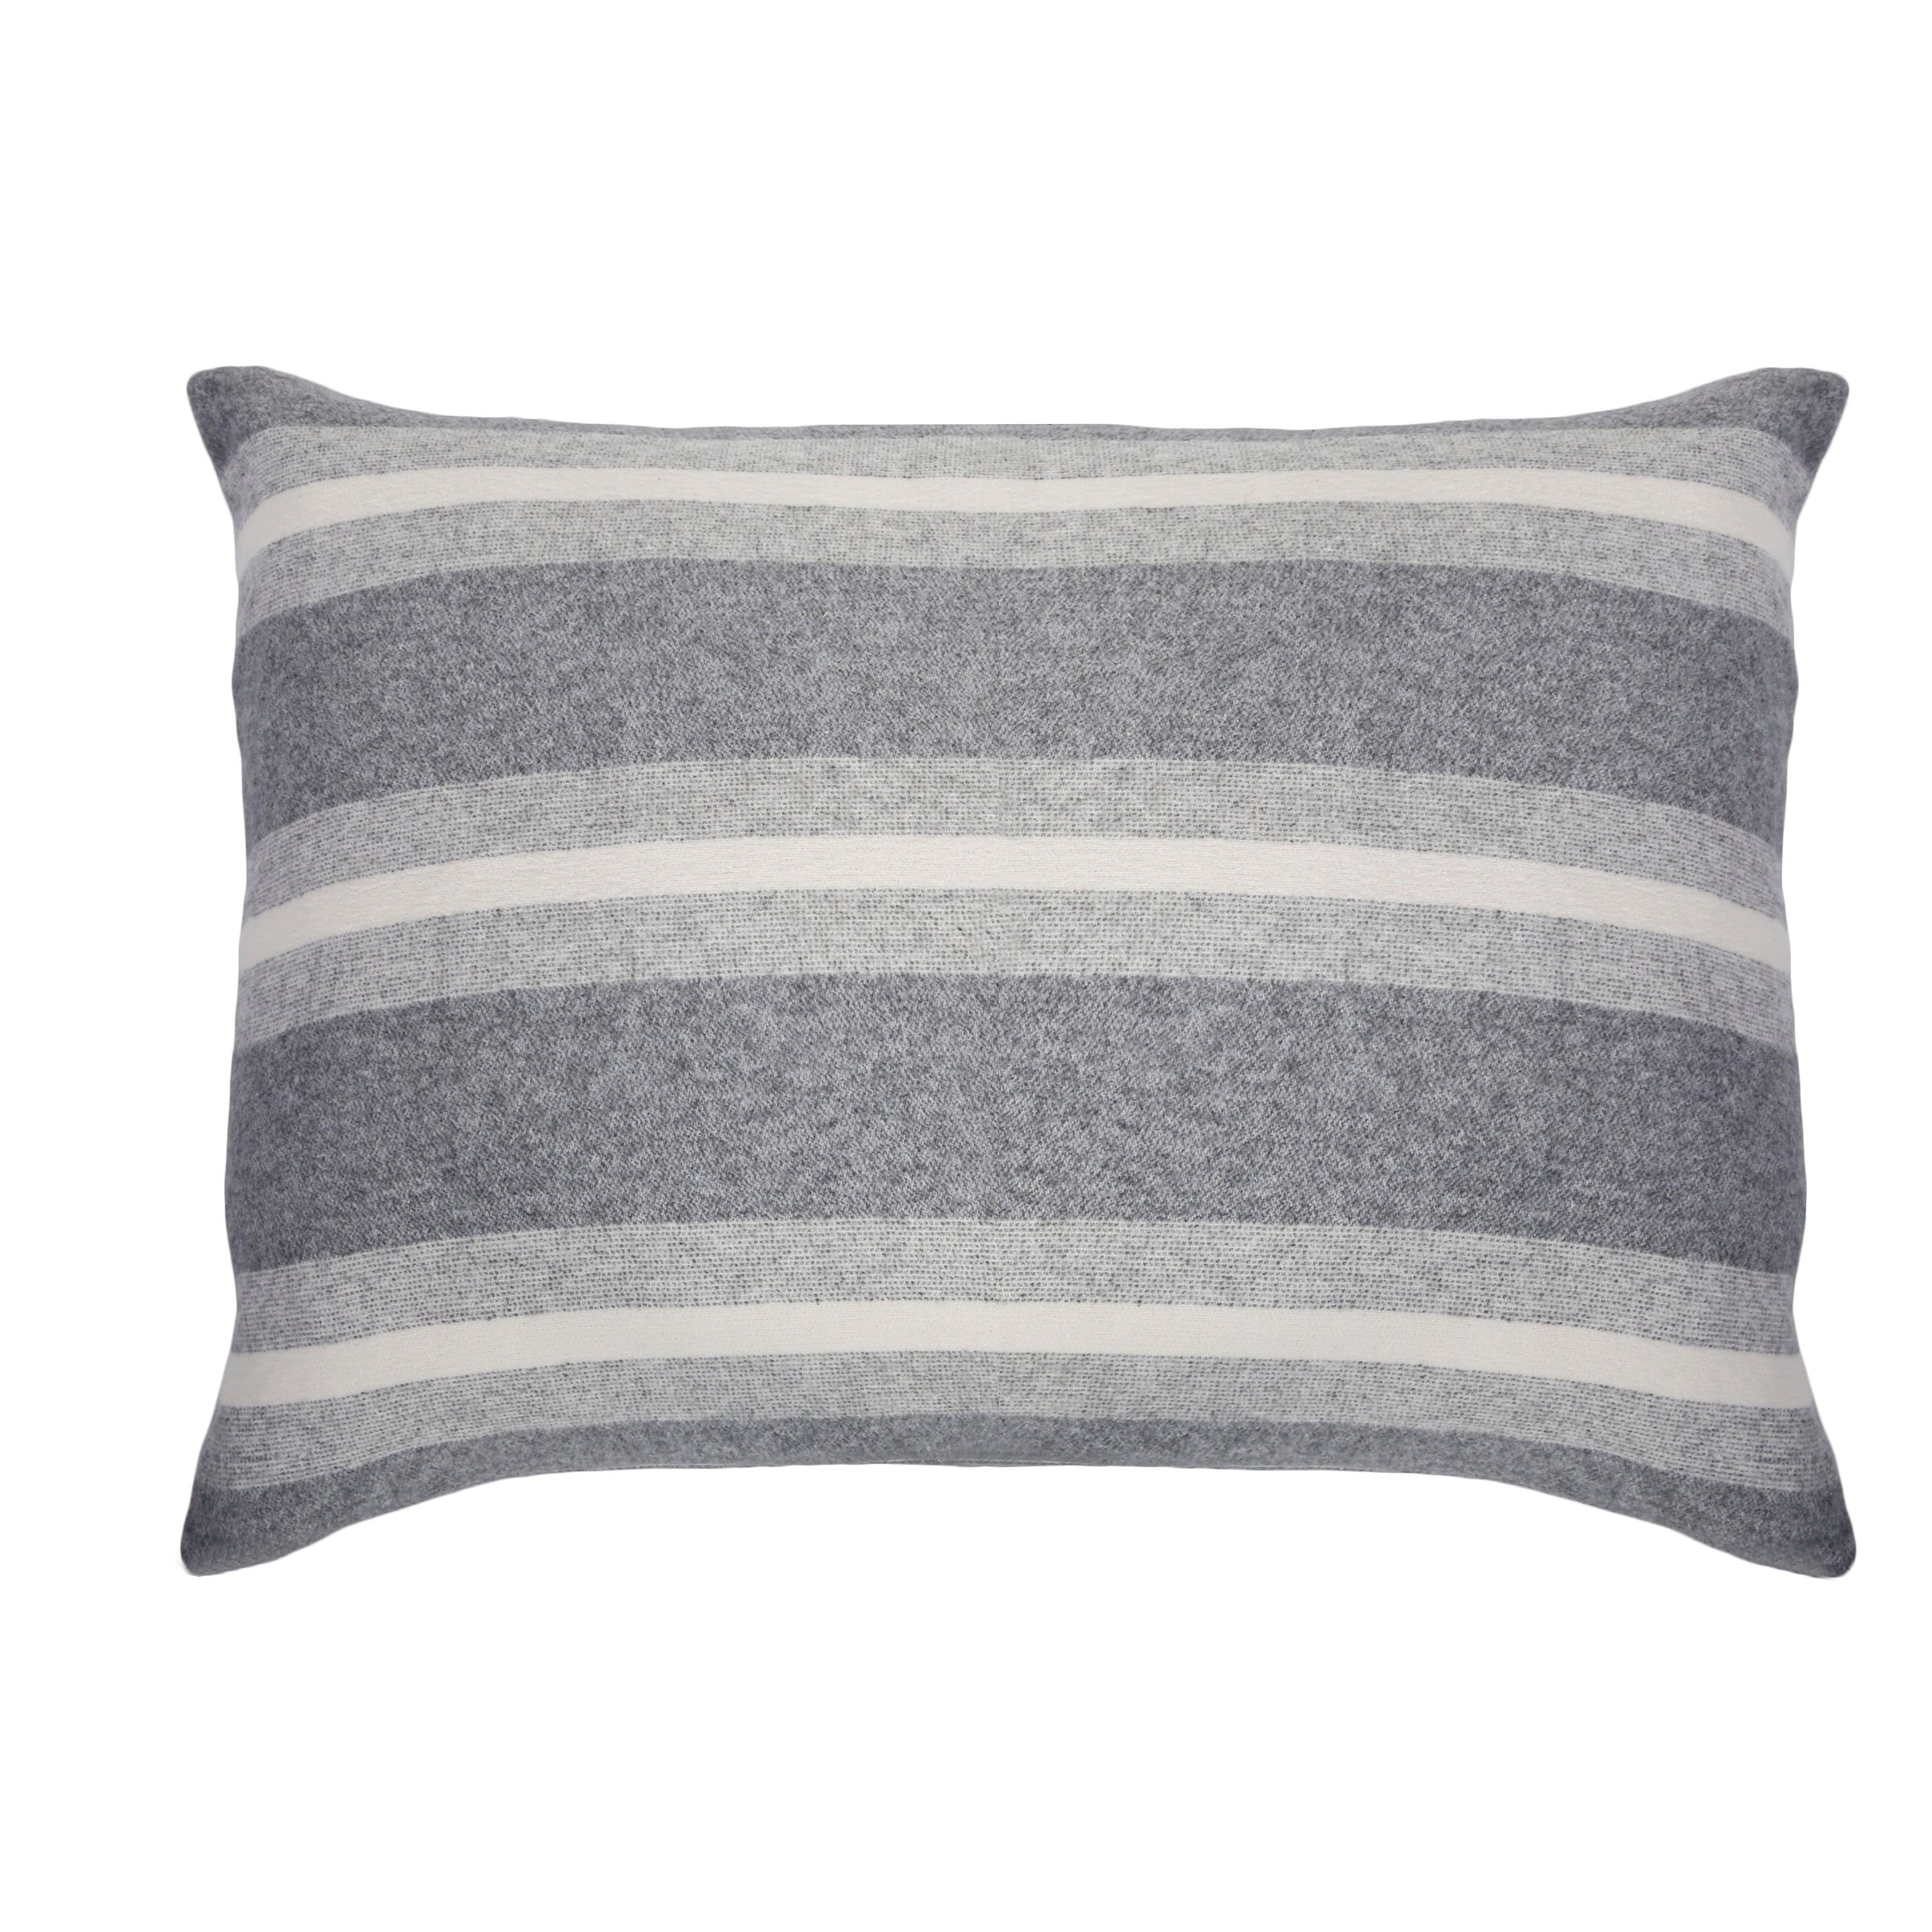 ALPINE BIG PILLOW 28&quot; X 36&quot; WITH INSERT-Pom Pom at Home